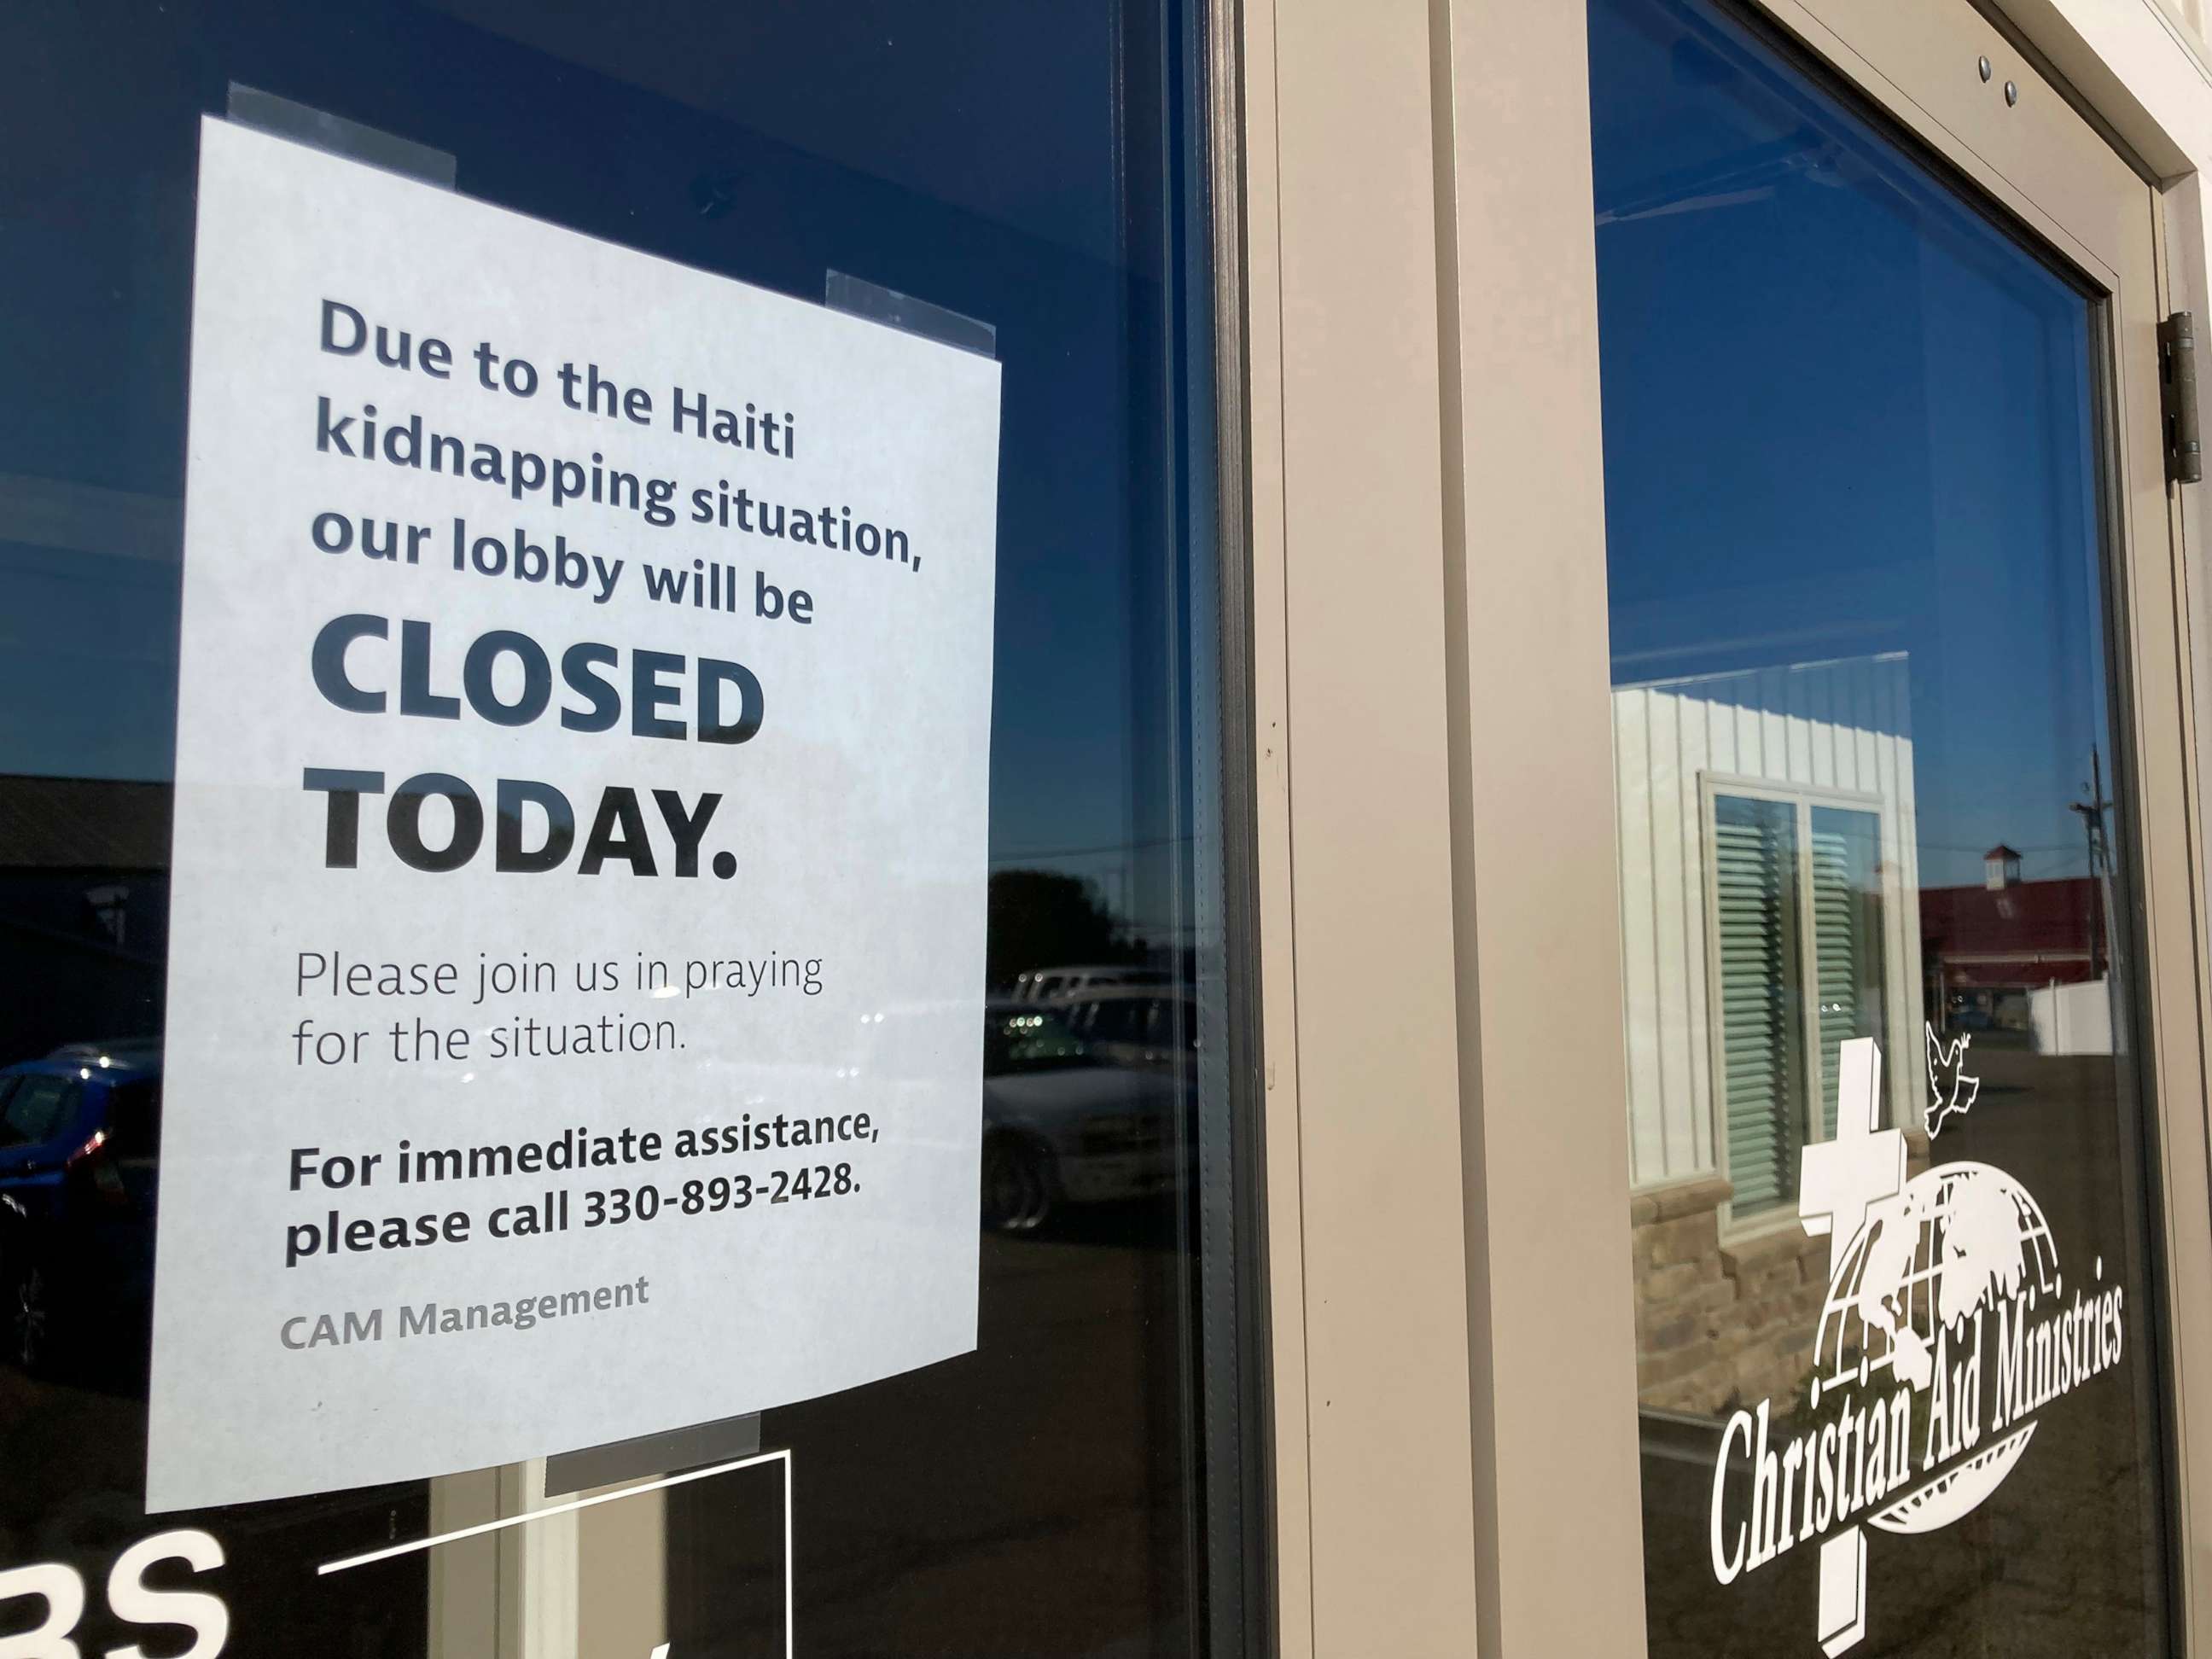 PHOTO: A closed sign is posted at The Christian Aid Ministries headquarters in Berlin, Ohio on Oct. 18, 2021, following the kidnapping of their staff in Haiti.